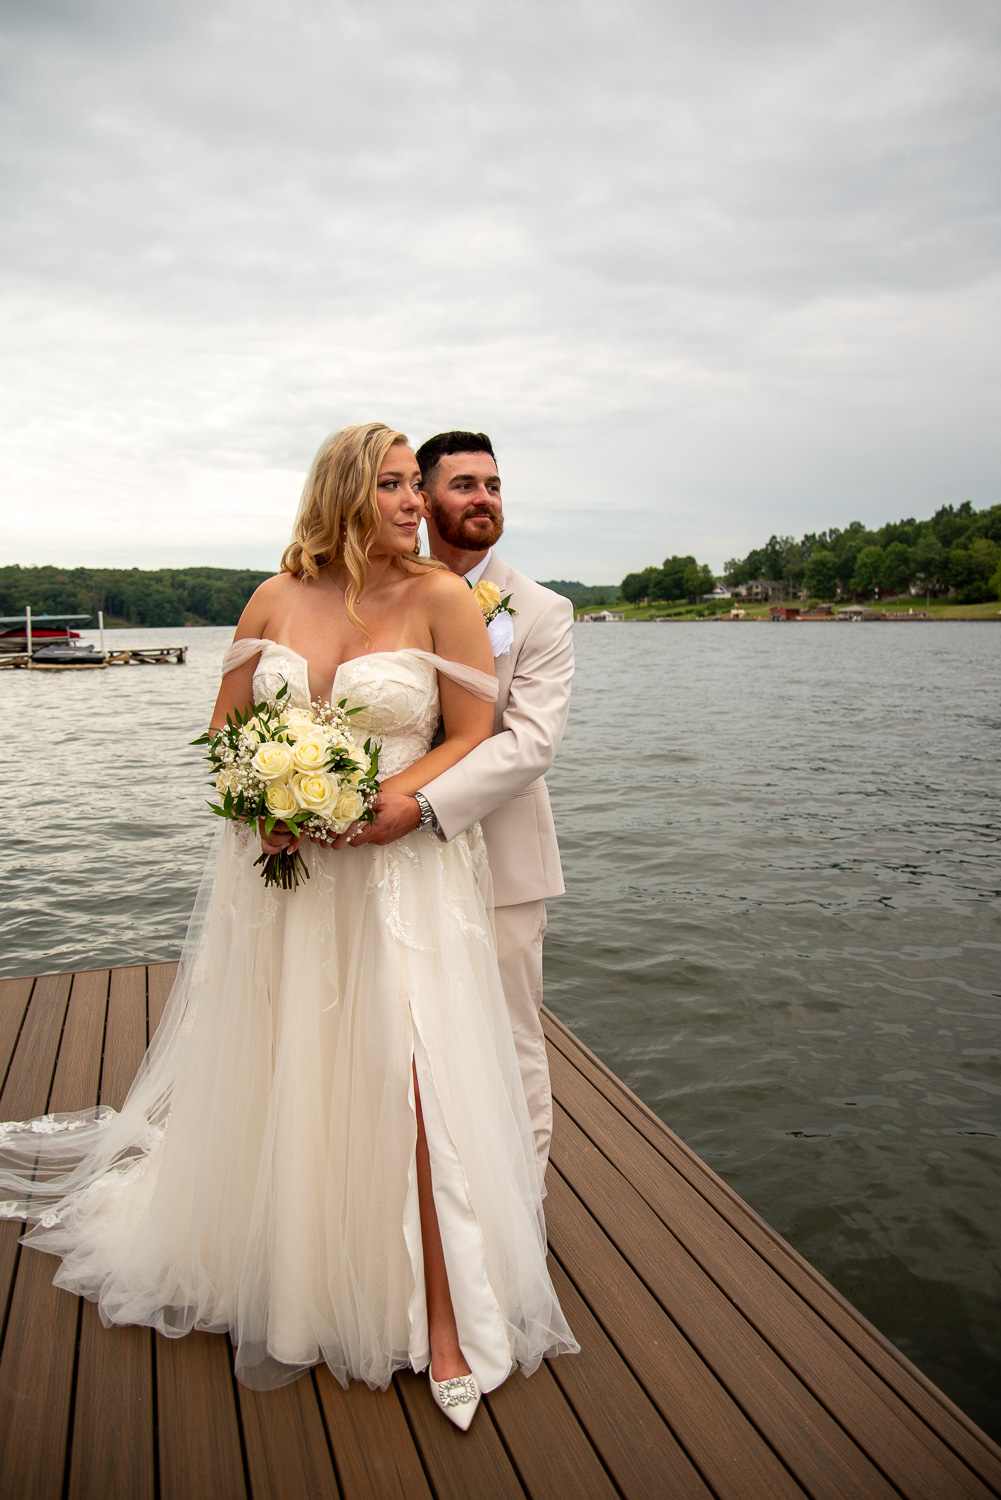 The bride and groom standing on a dock with the lake behind them after the summer getaway wedding